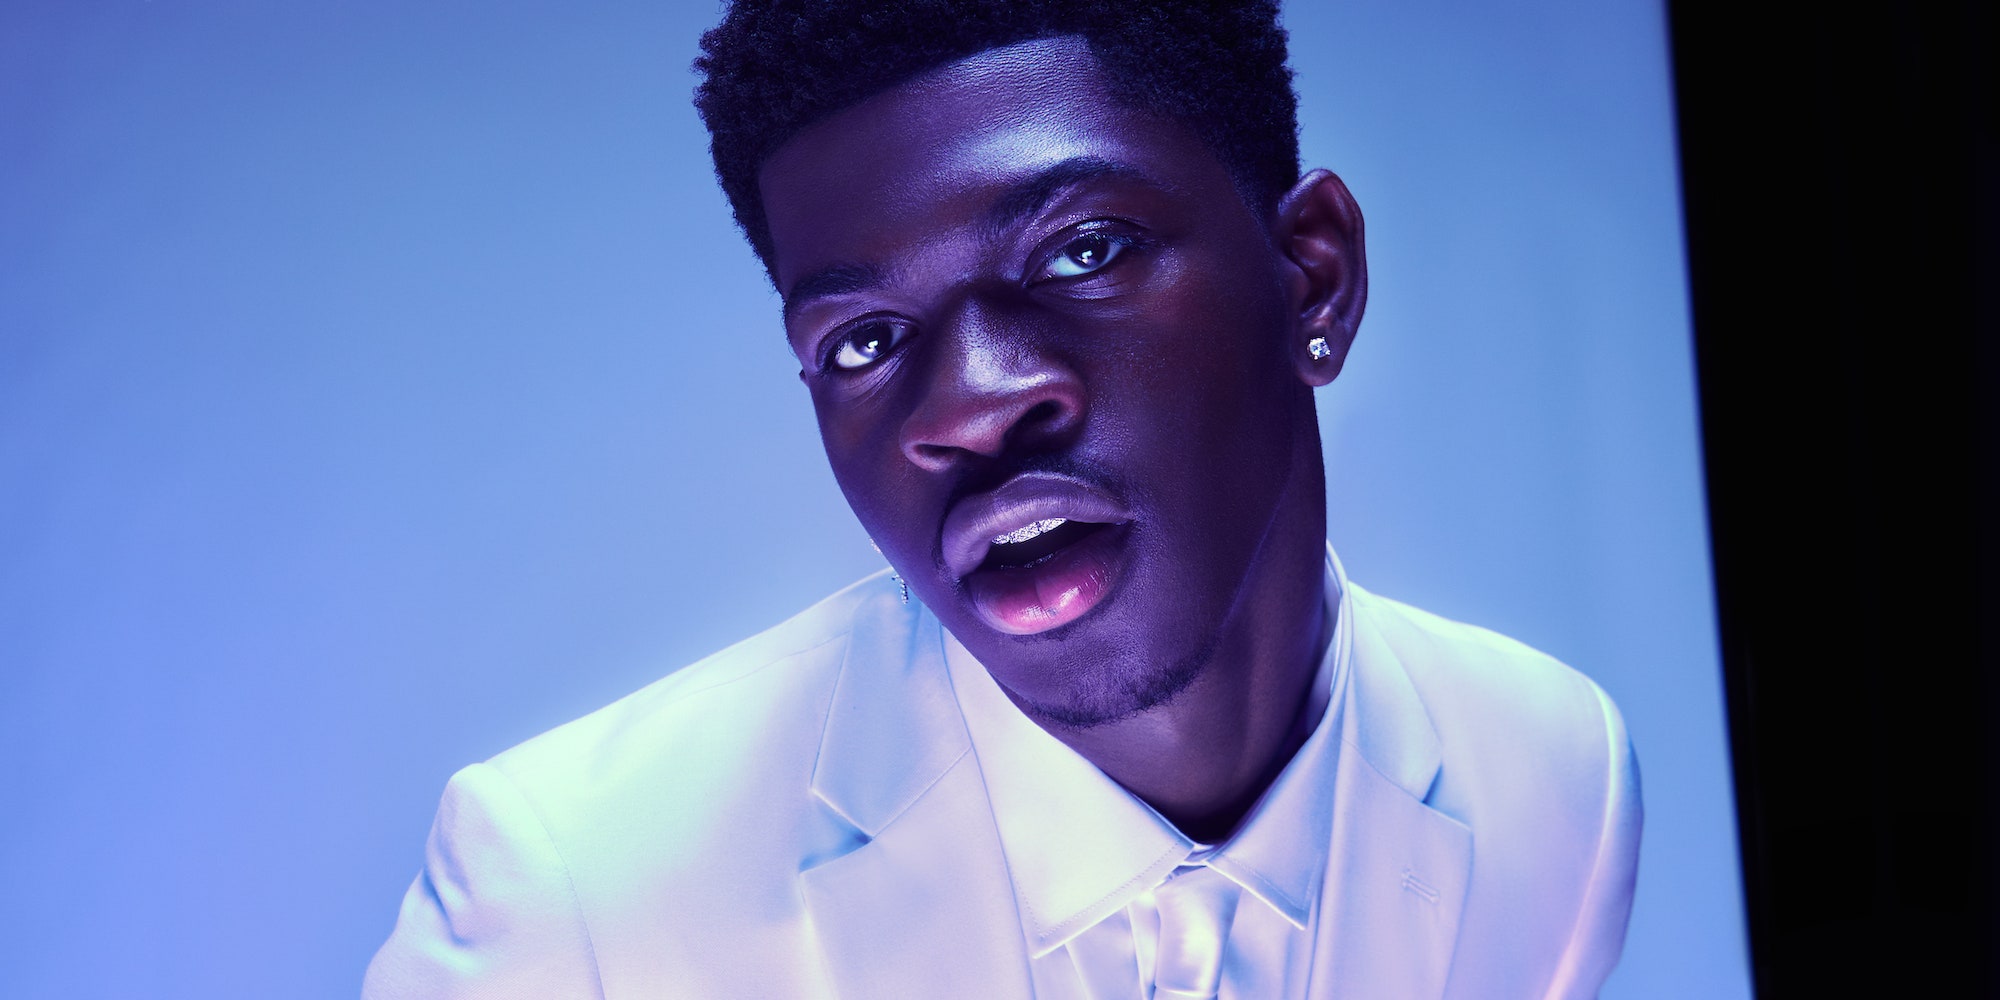 Lil Nas X Shares Video for New Song “Sun Goes Down”: Watch | Pitchfork